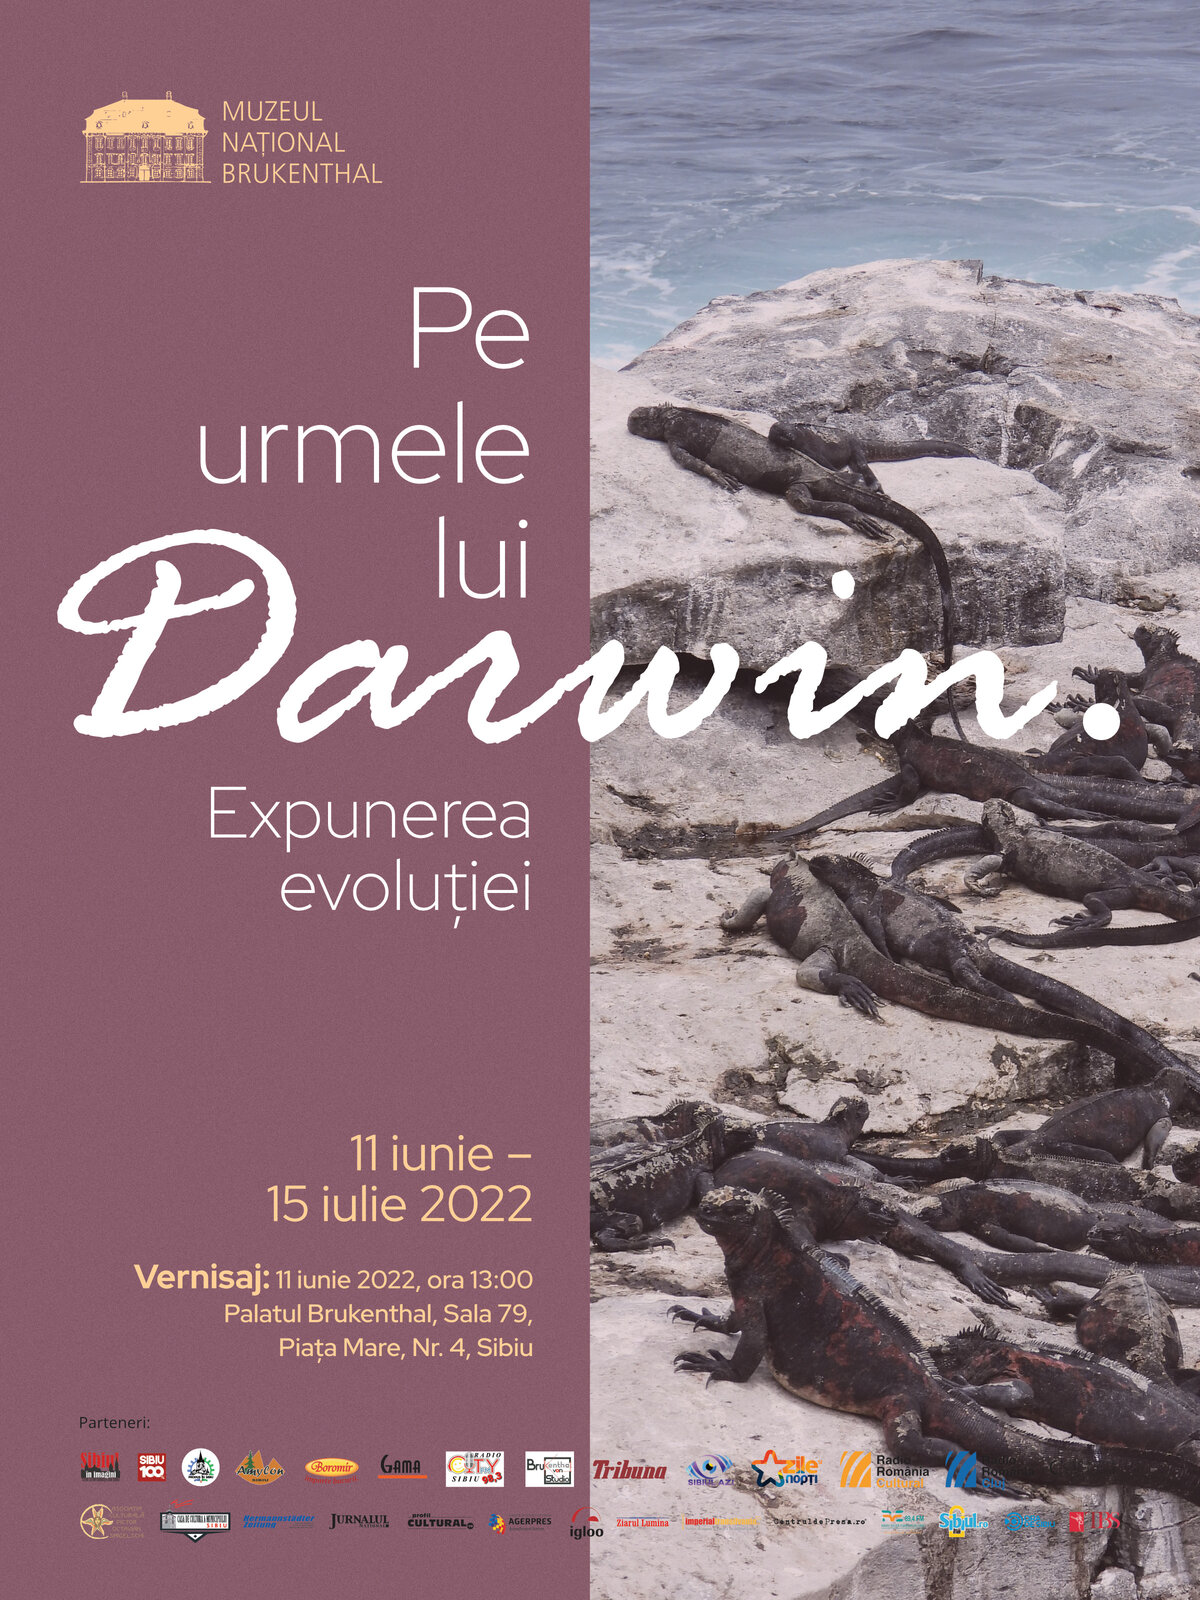 On the footsteps of Darwin. Exhibiting evolution